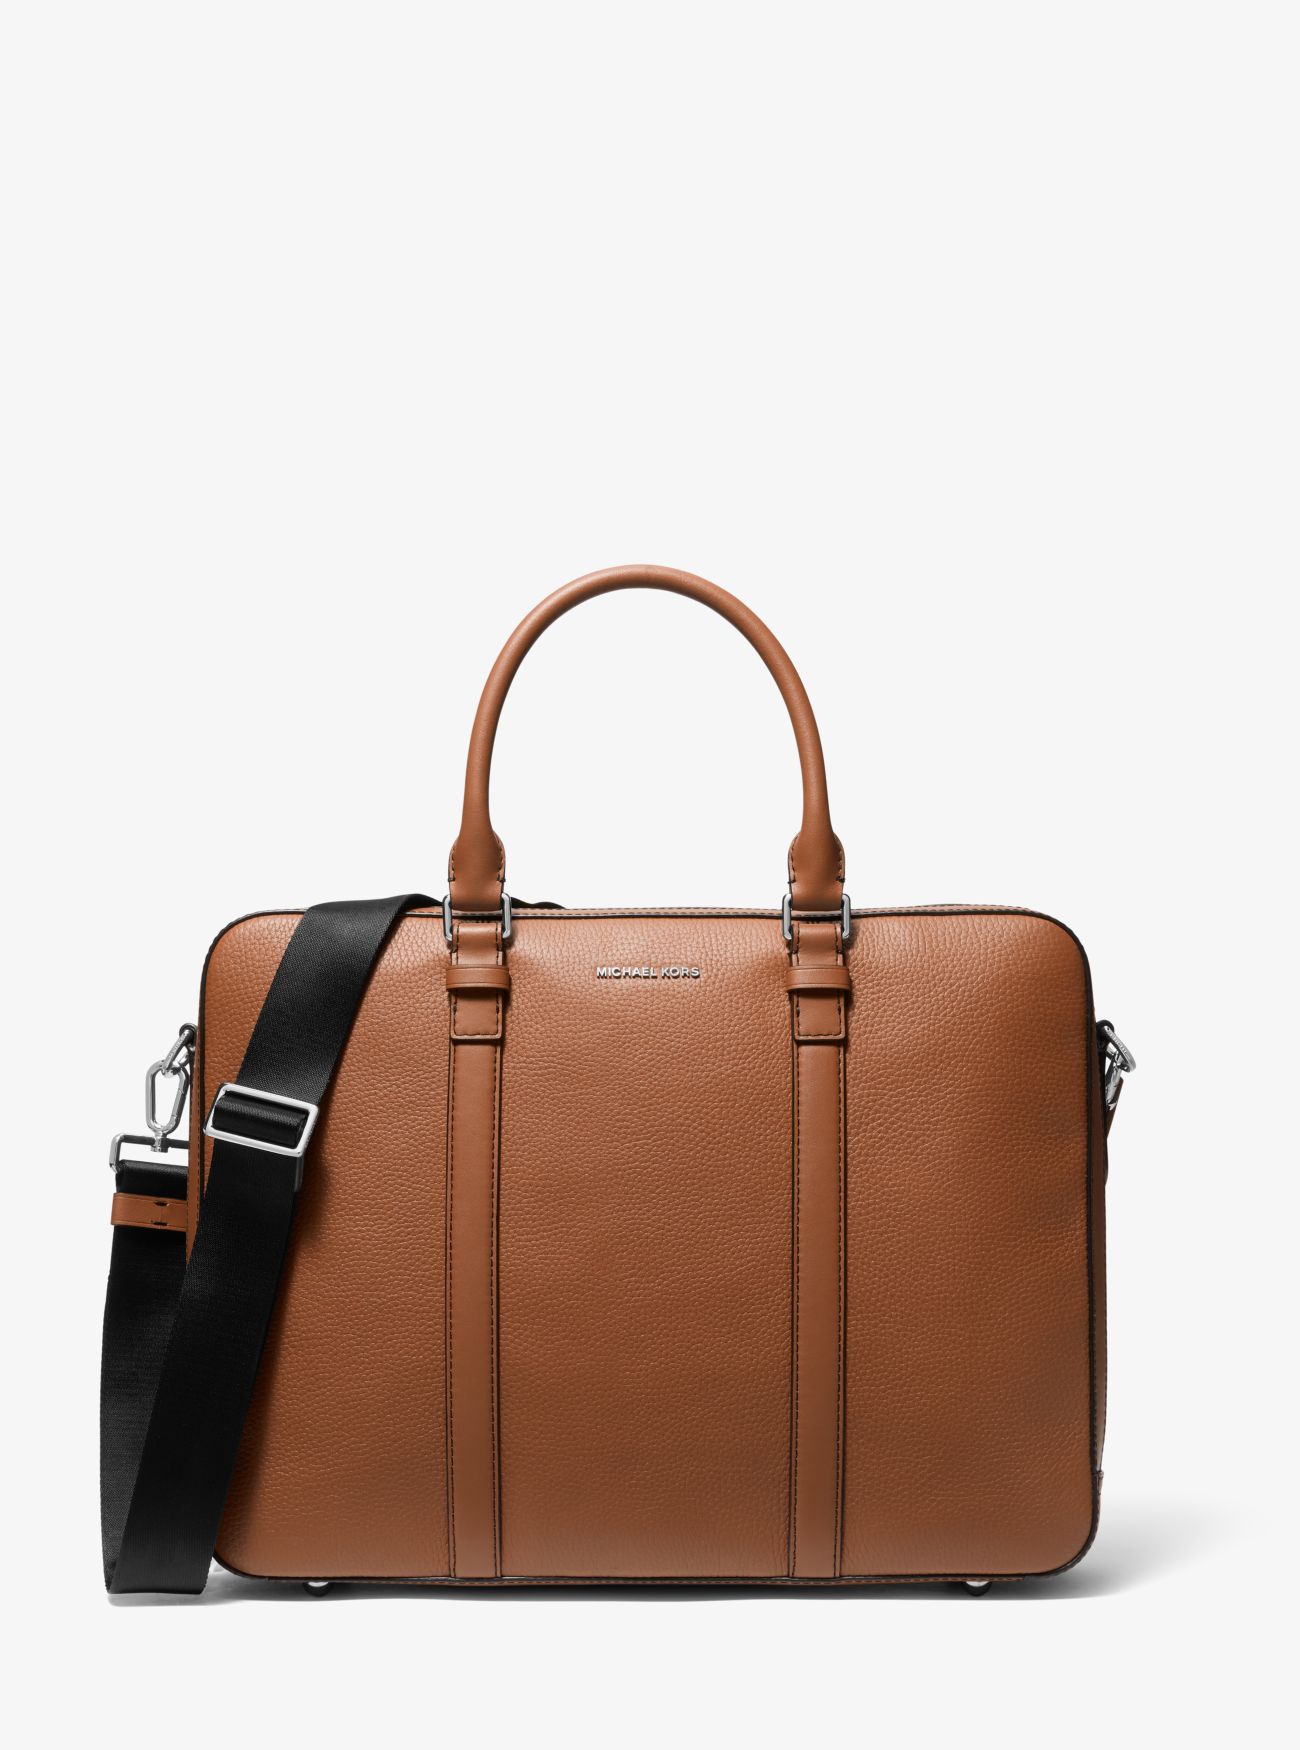 MK Hudson Logo and Leather Double-Gusset Briefcase - Brown - Michael Kors